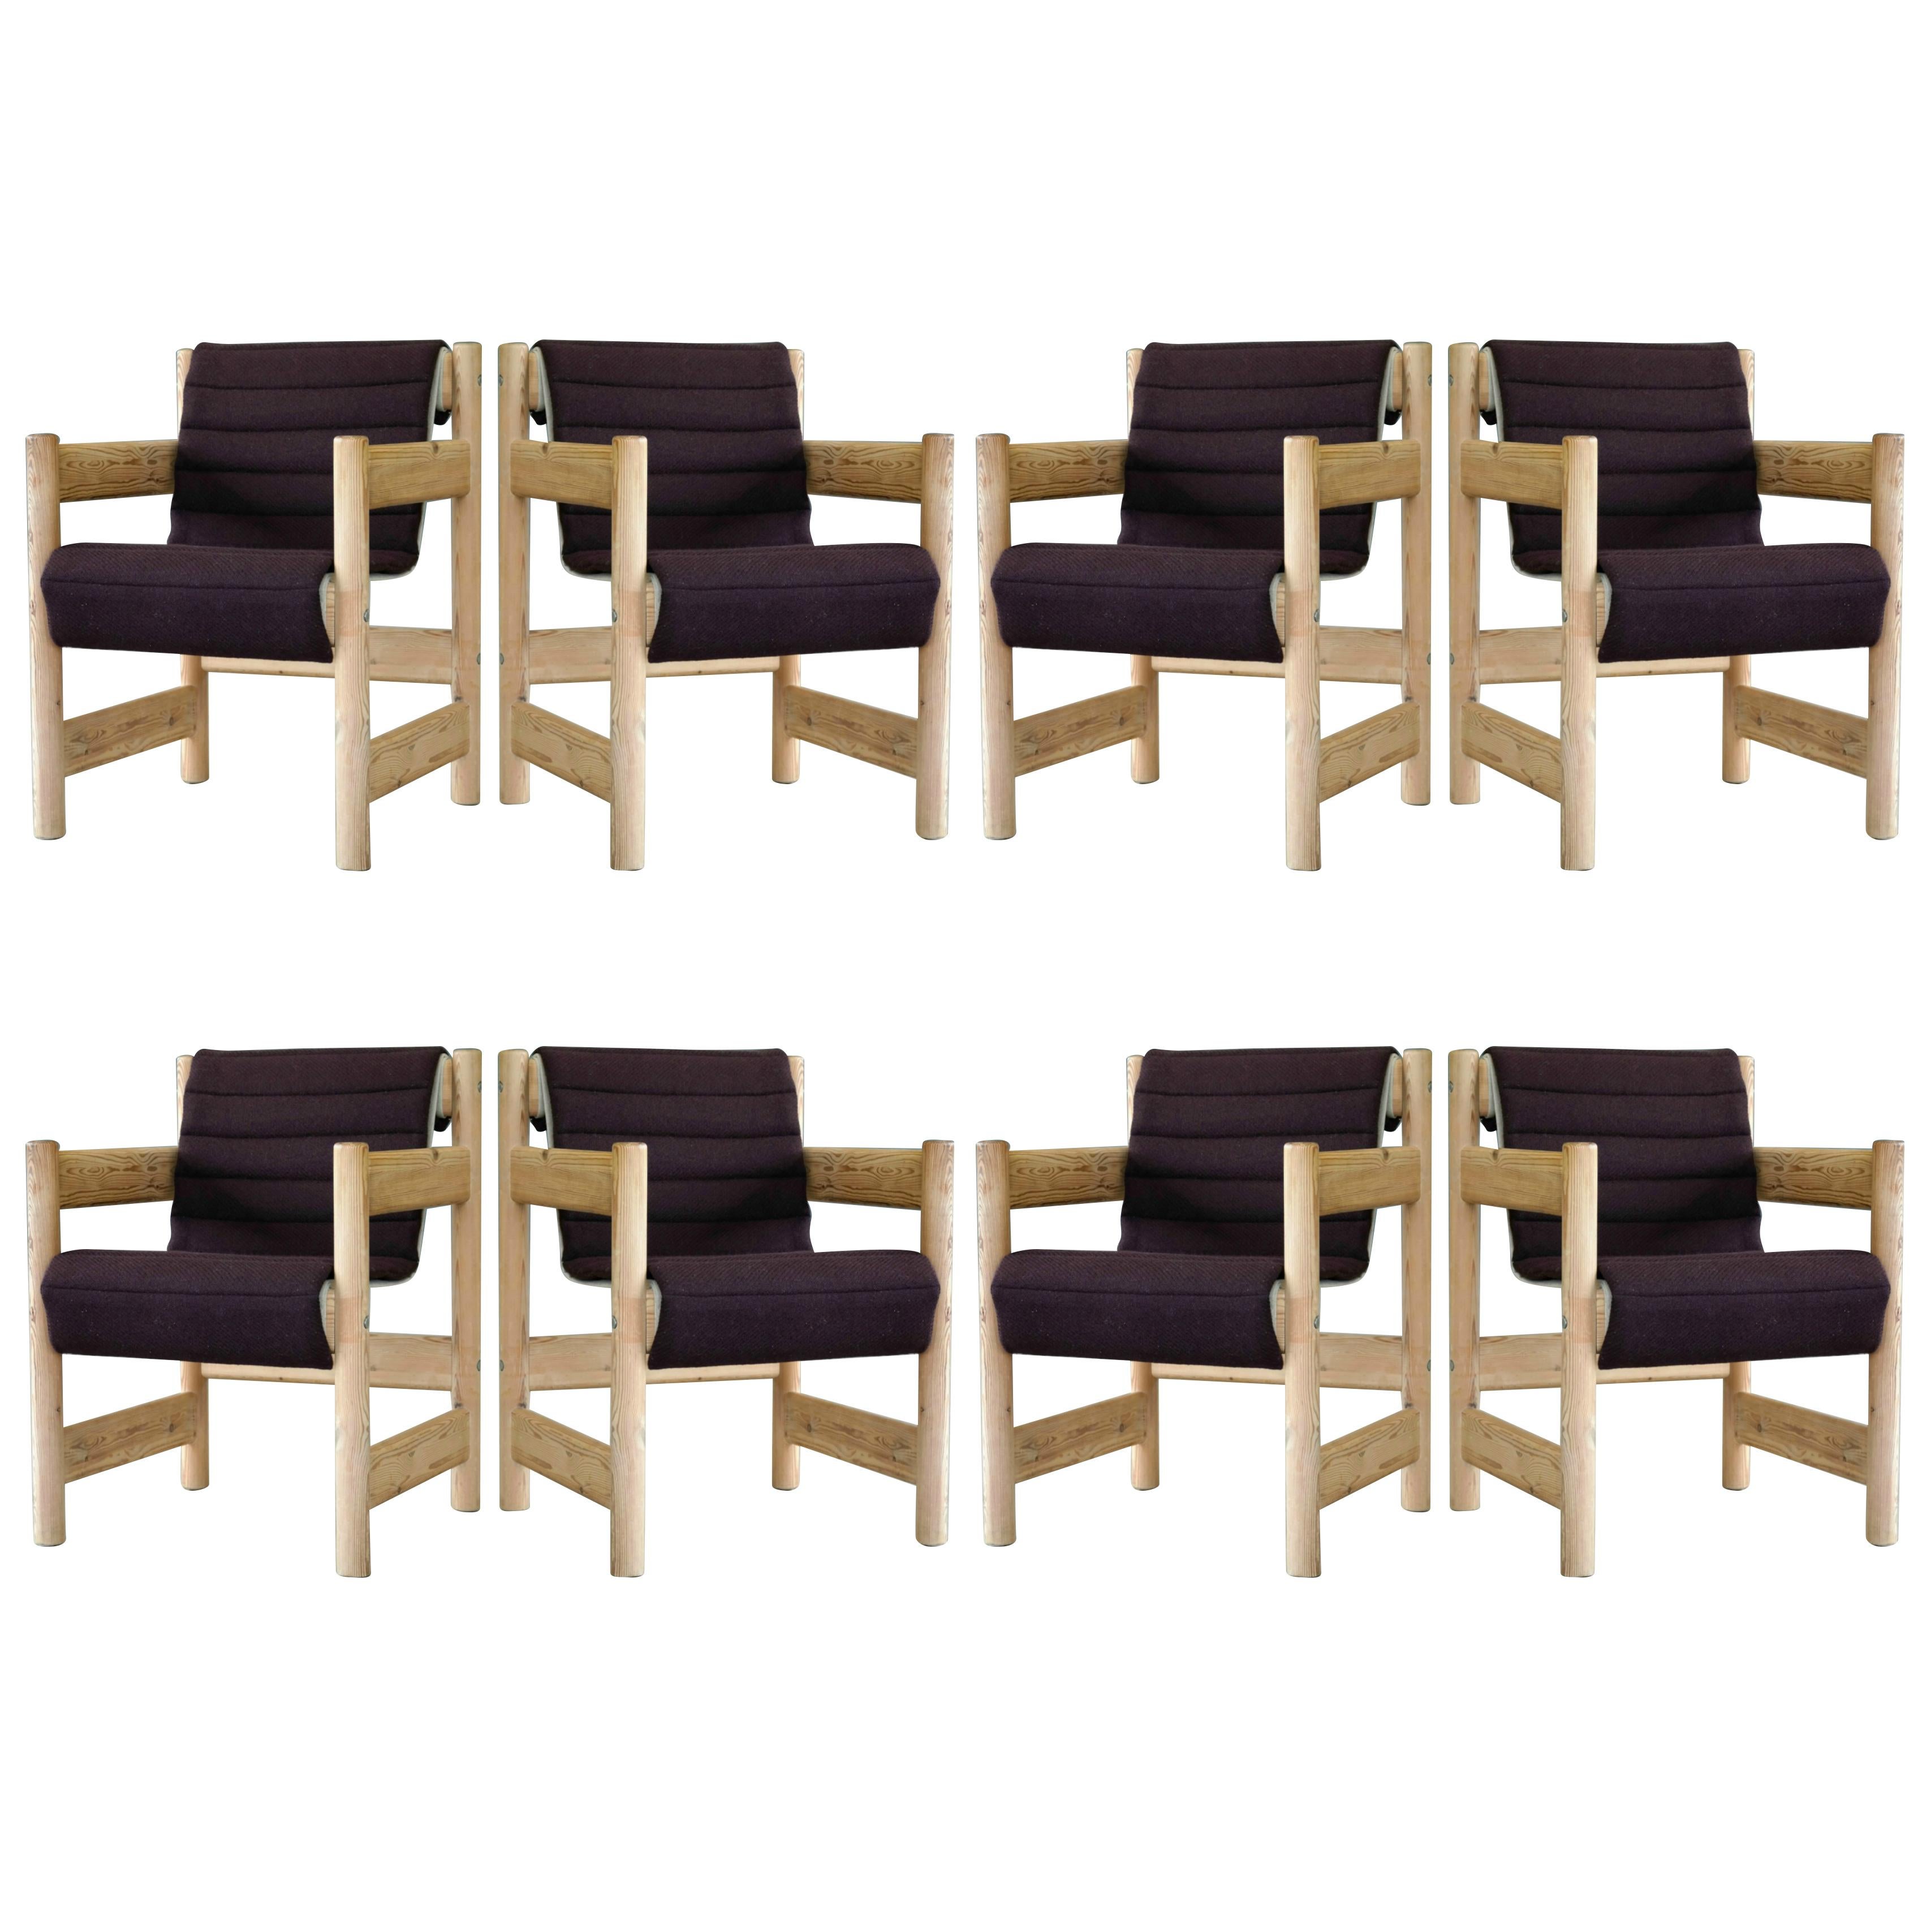 Set of Eight Børge Mogensen Style Dining Chairs in Pine, Danish, Midcentury